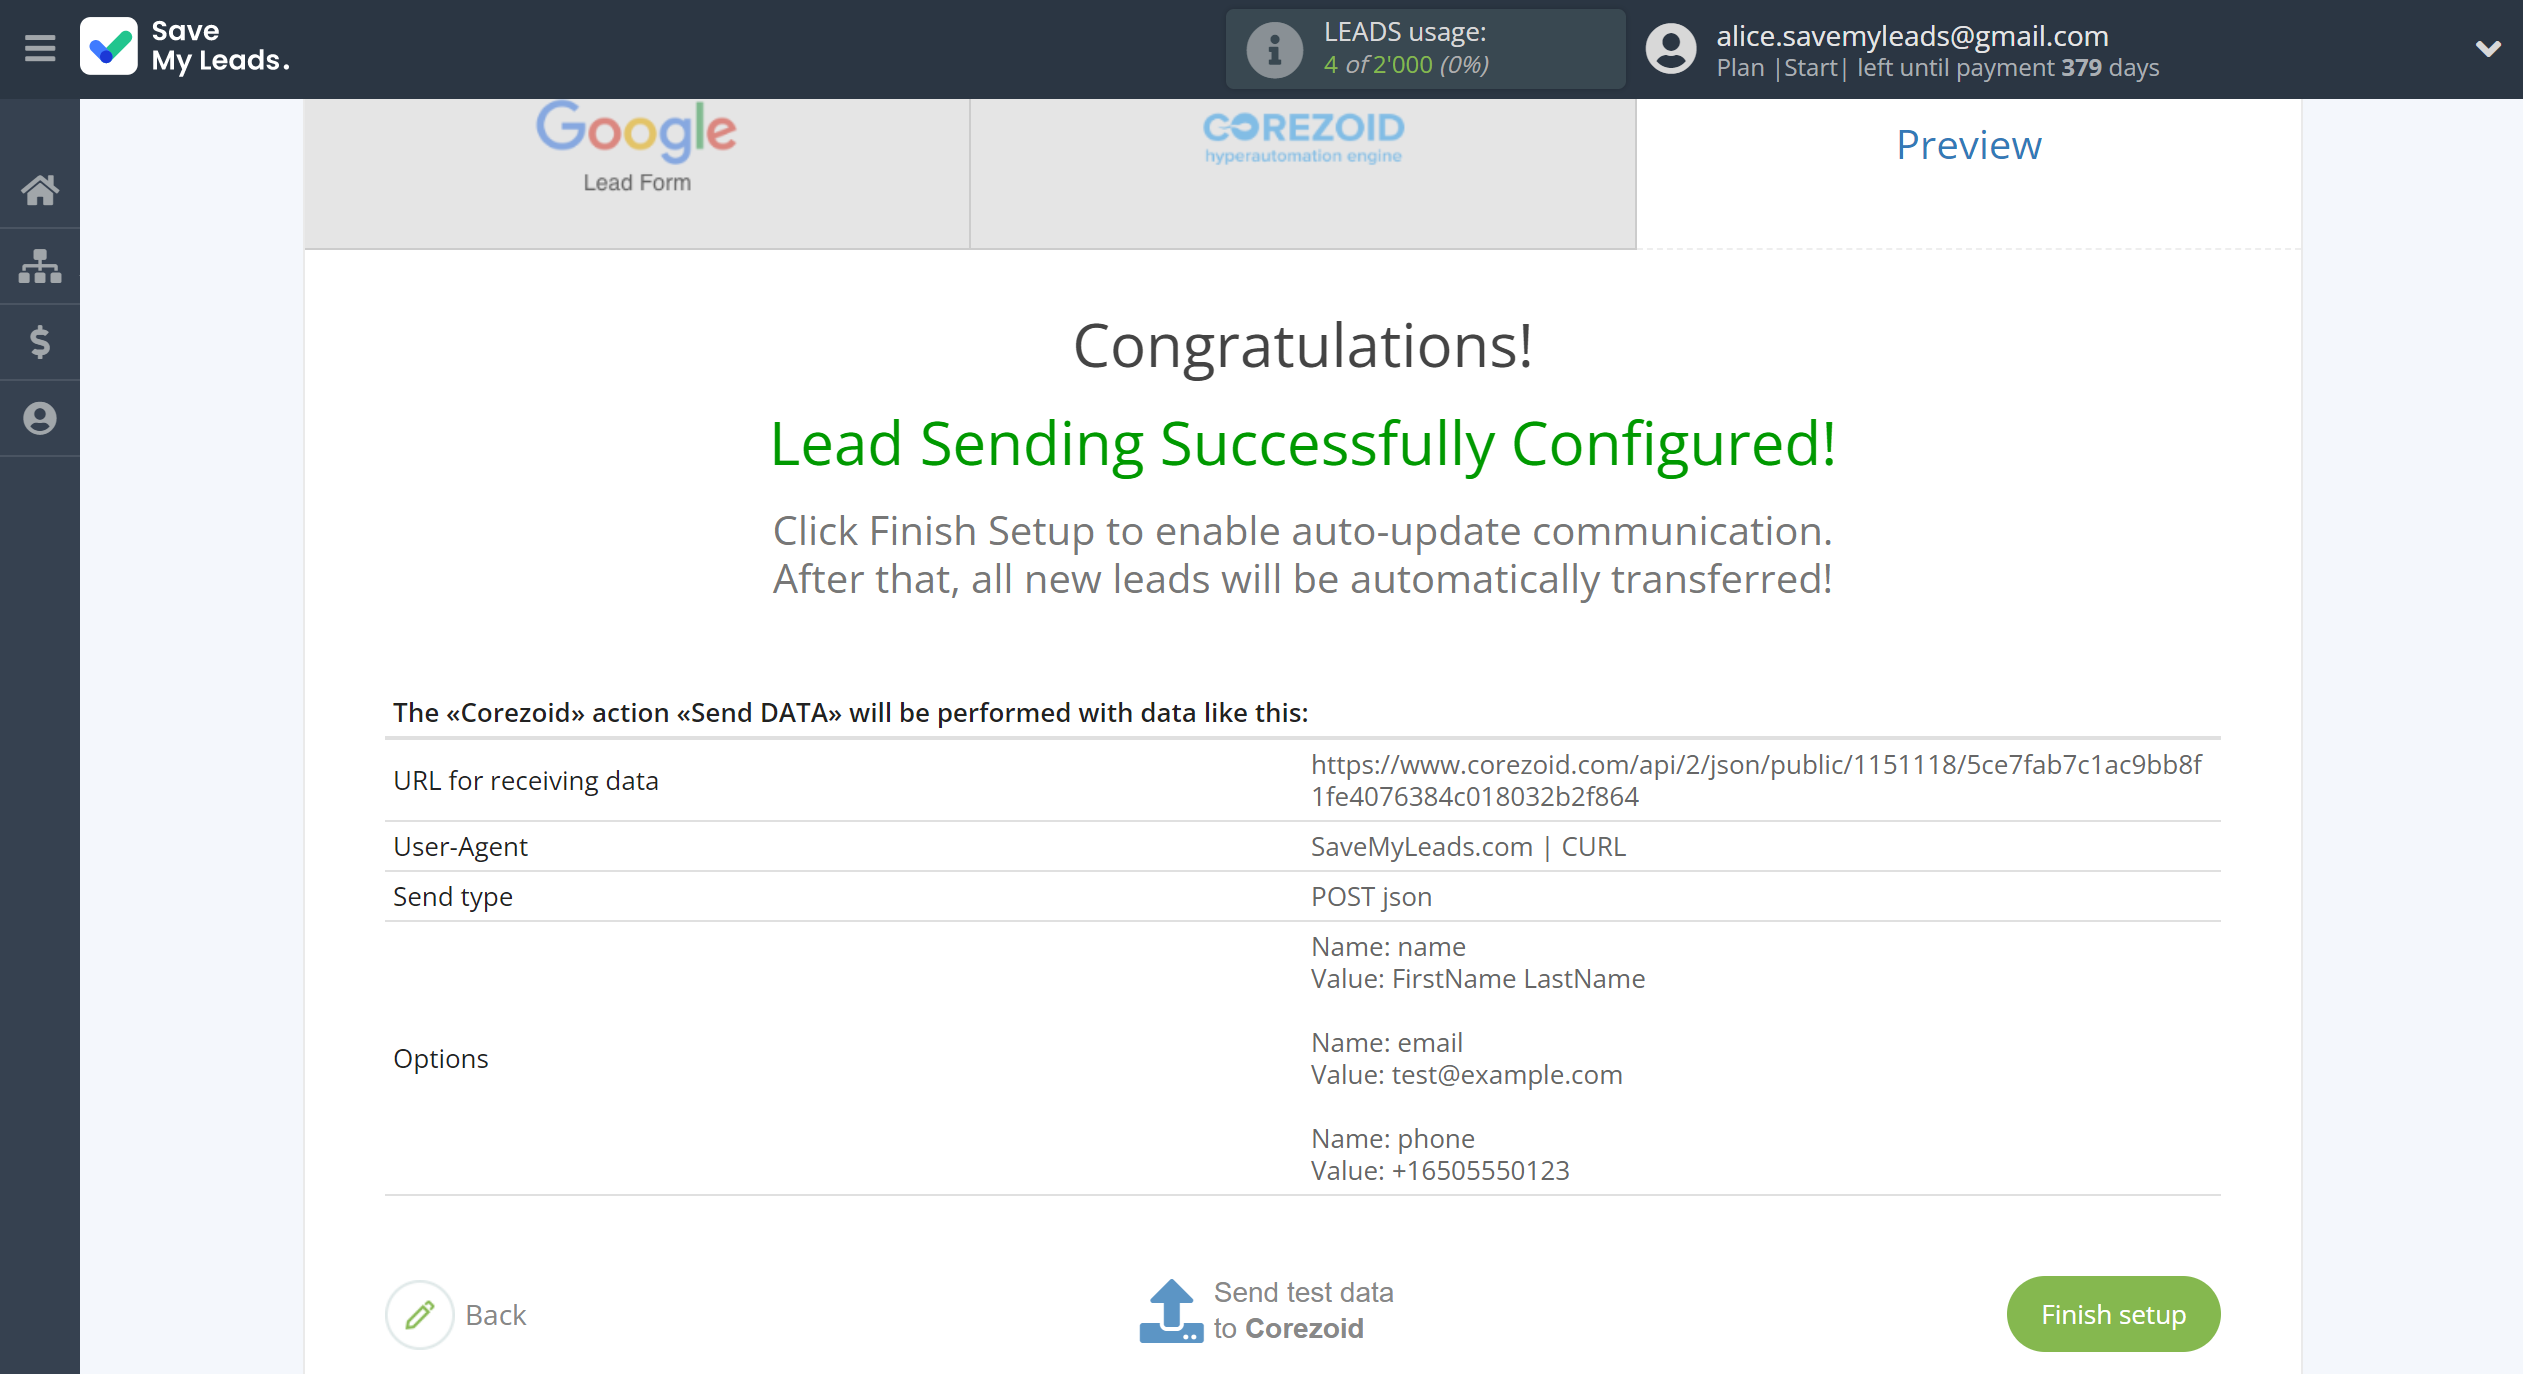 How to Connect Google Lead Form with Corezoid | Test data